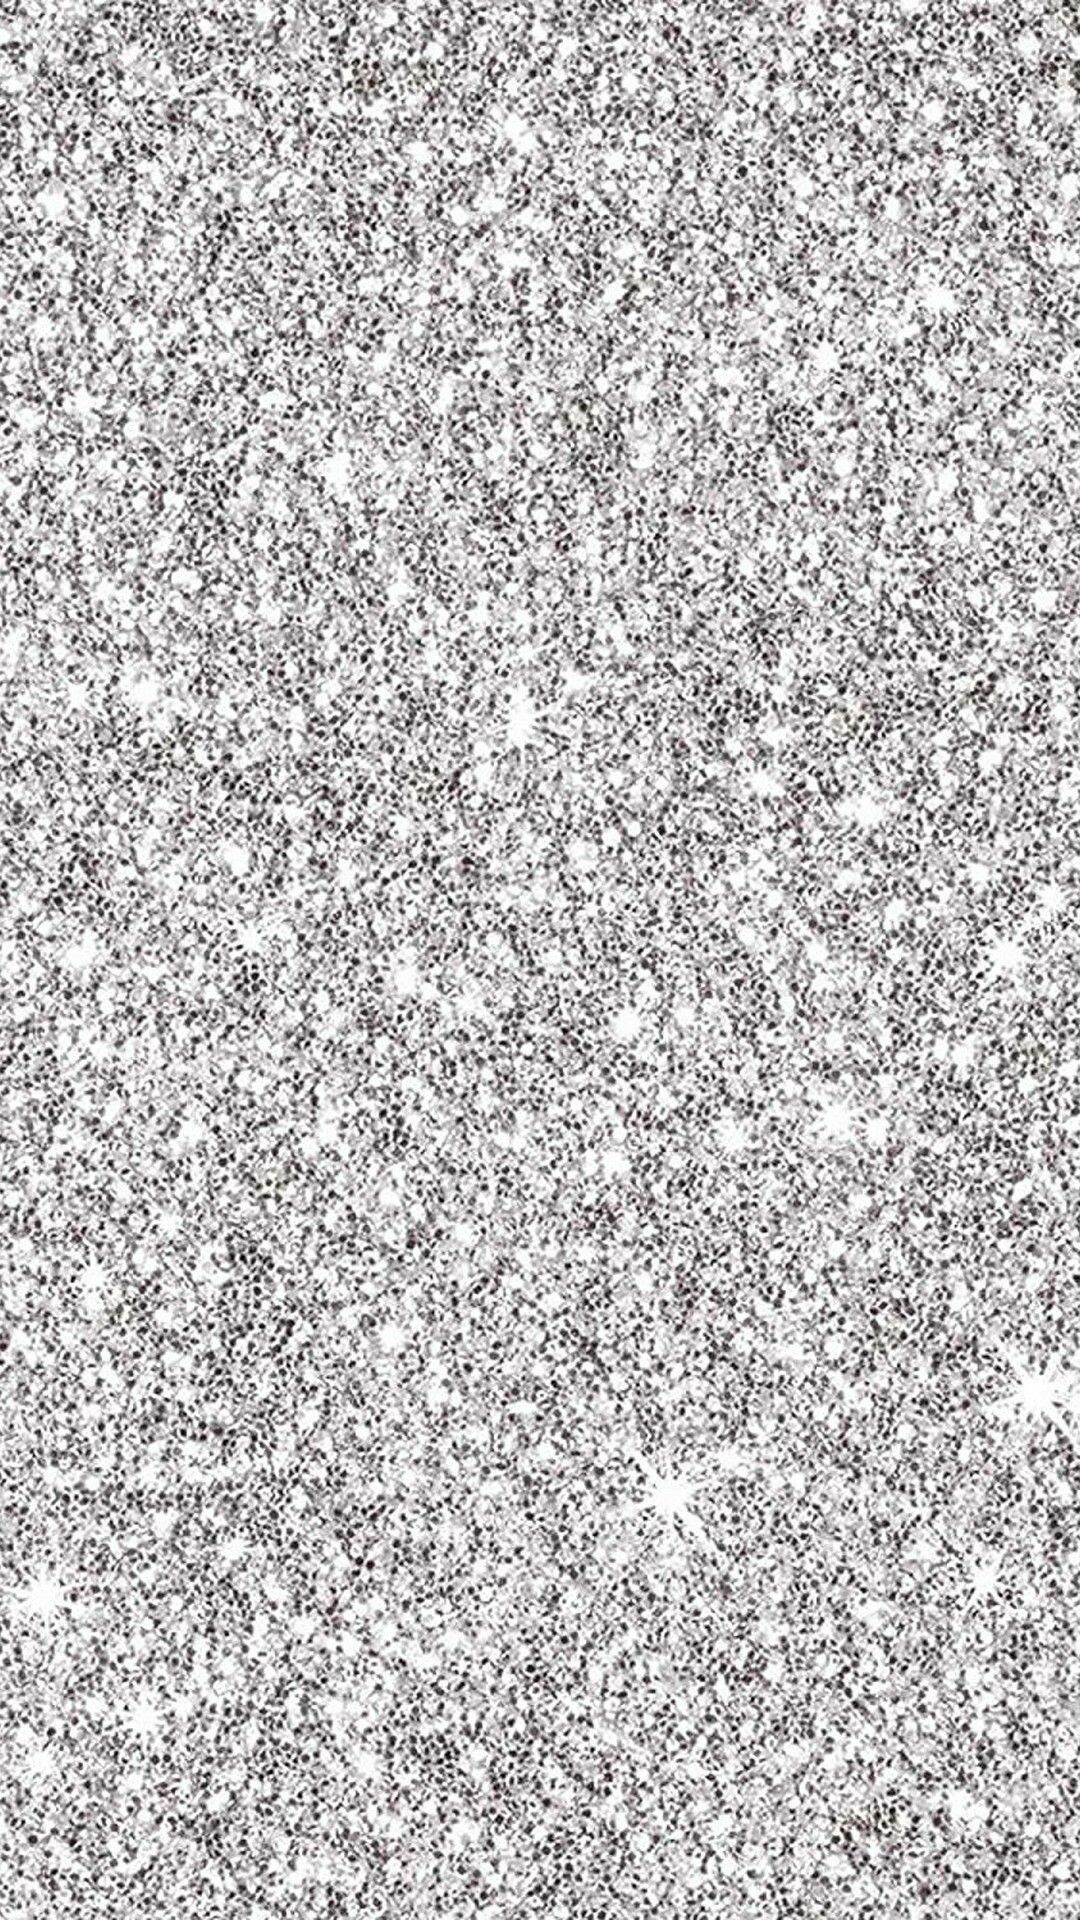 Sparkle: Sliver glitter, A tool of fashion used by various subcultures. 1080x1920 Full HD Background.